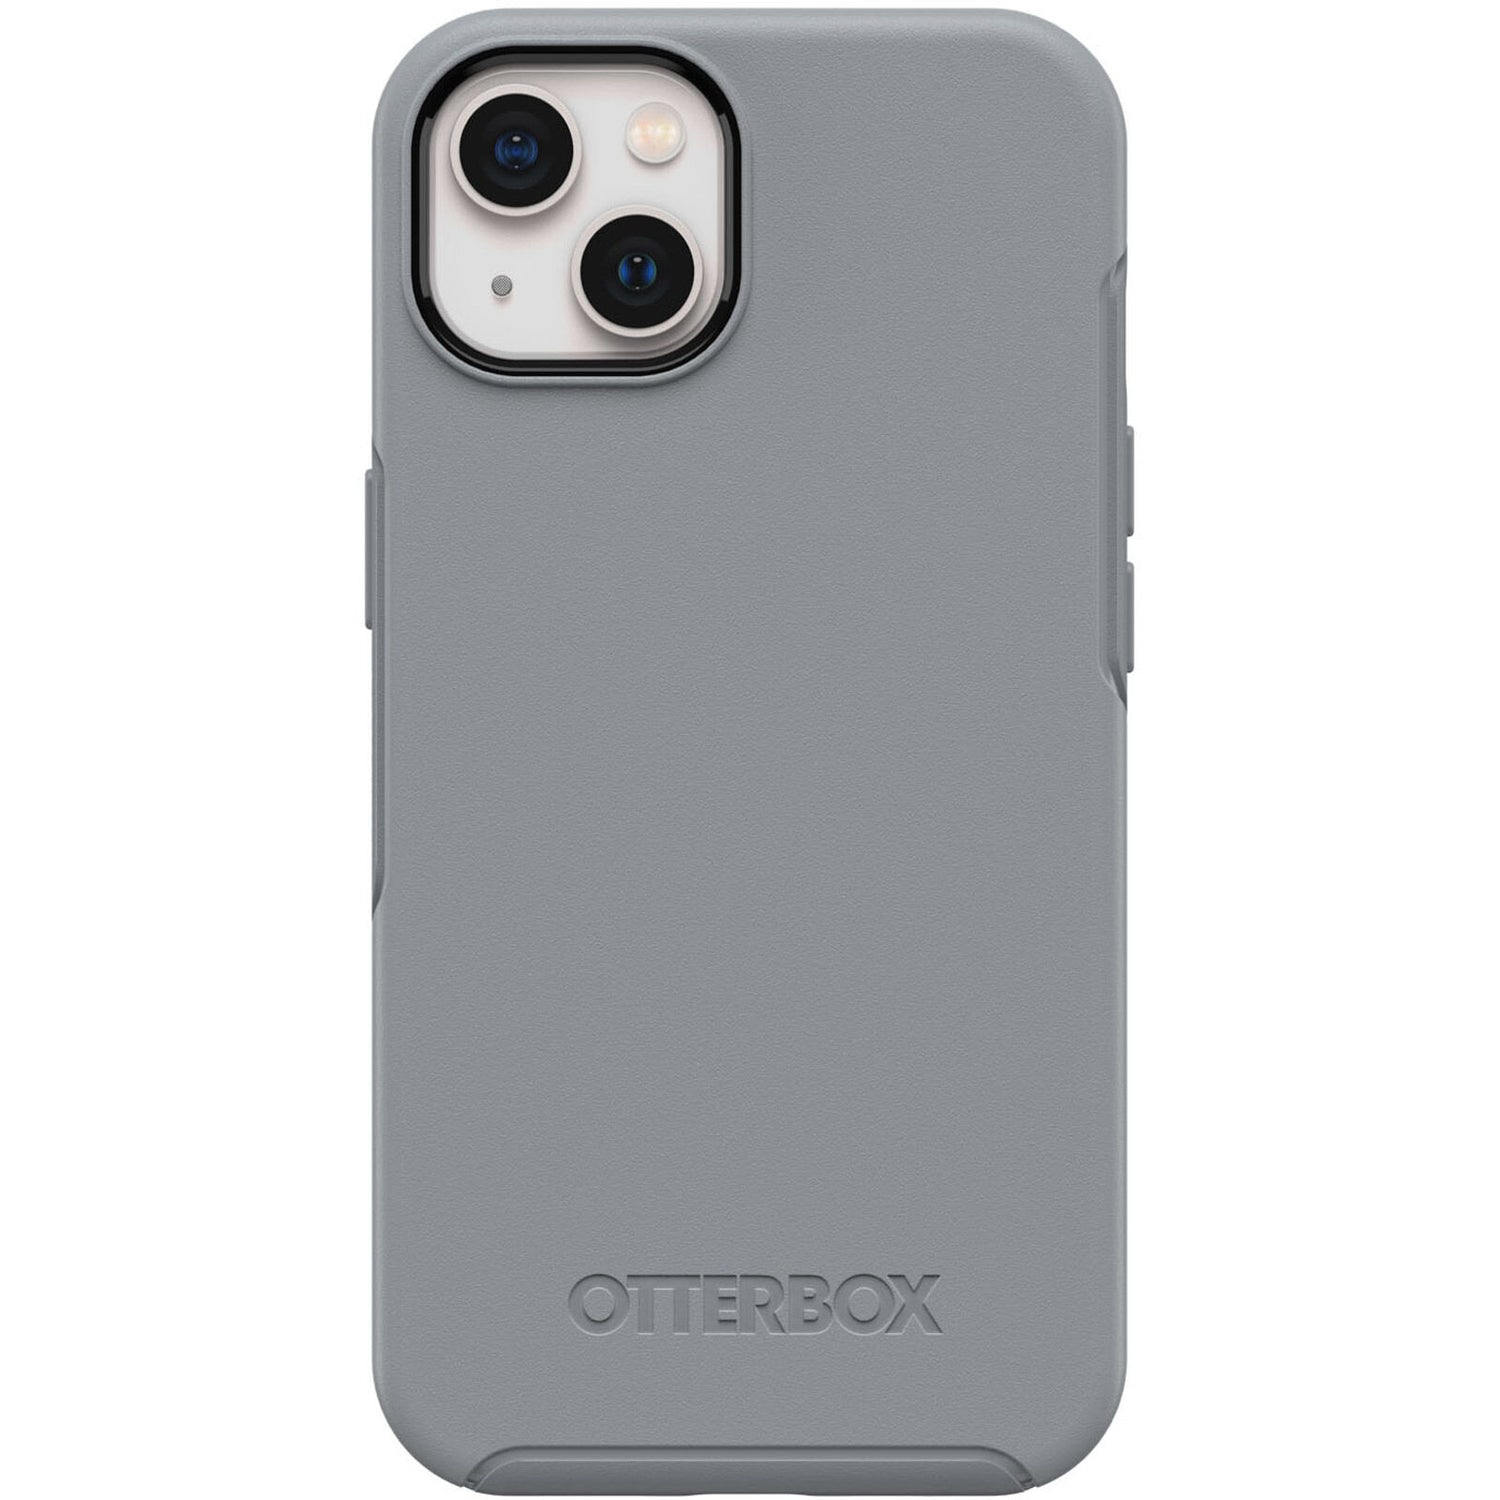 OtterBox SYMMETRY SERIES Case for Apple iPhone 13 - Resilience Grey (Certified Refurbished)